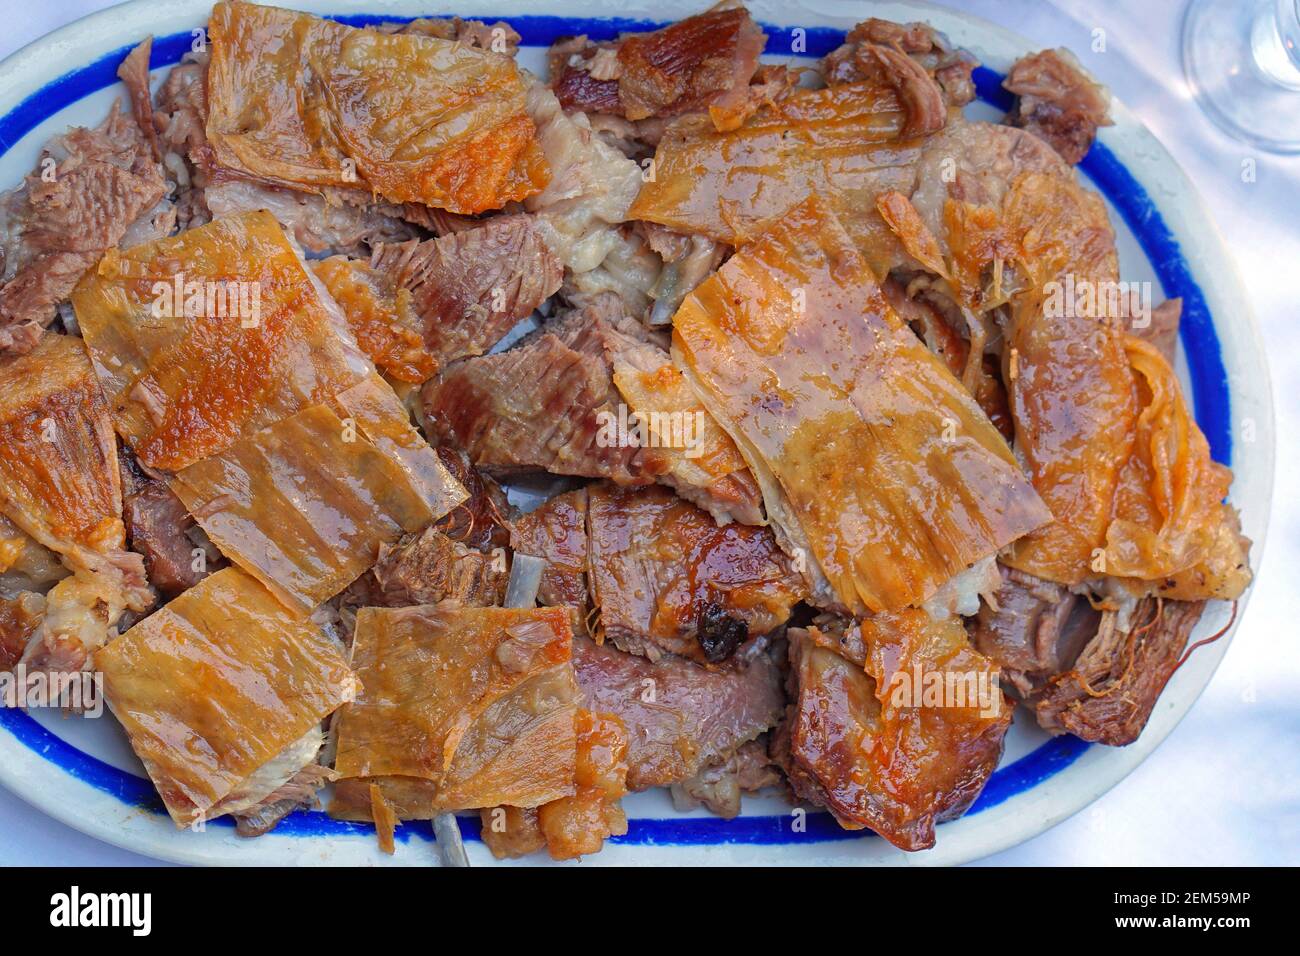 Roasted lamb served at oval platter gourment food Stock Photo